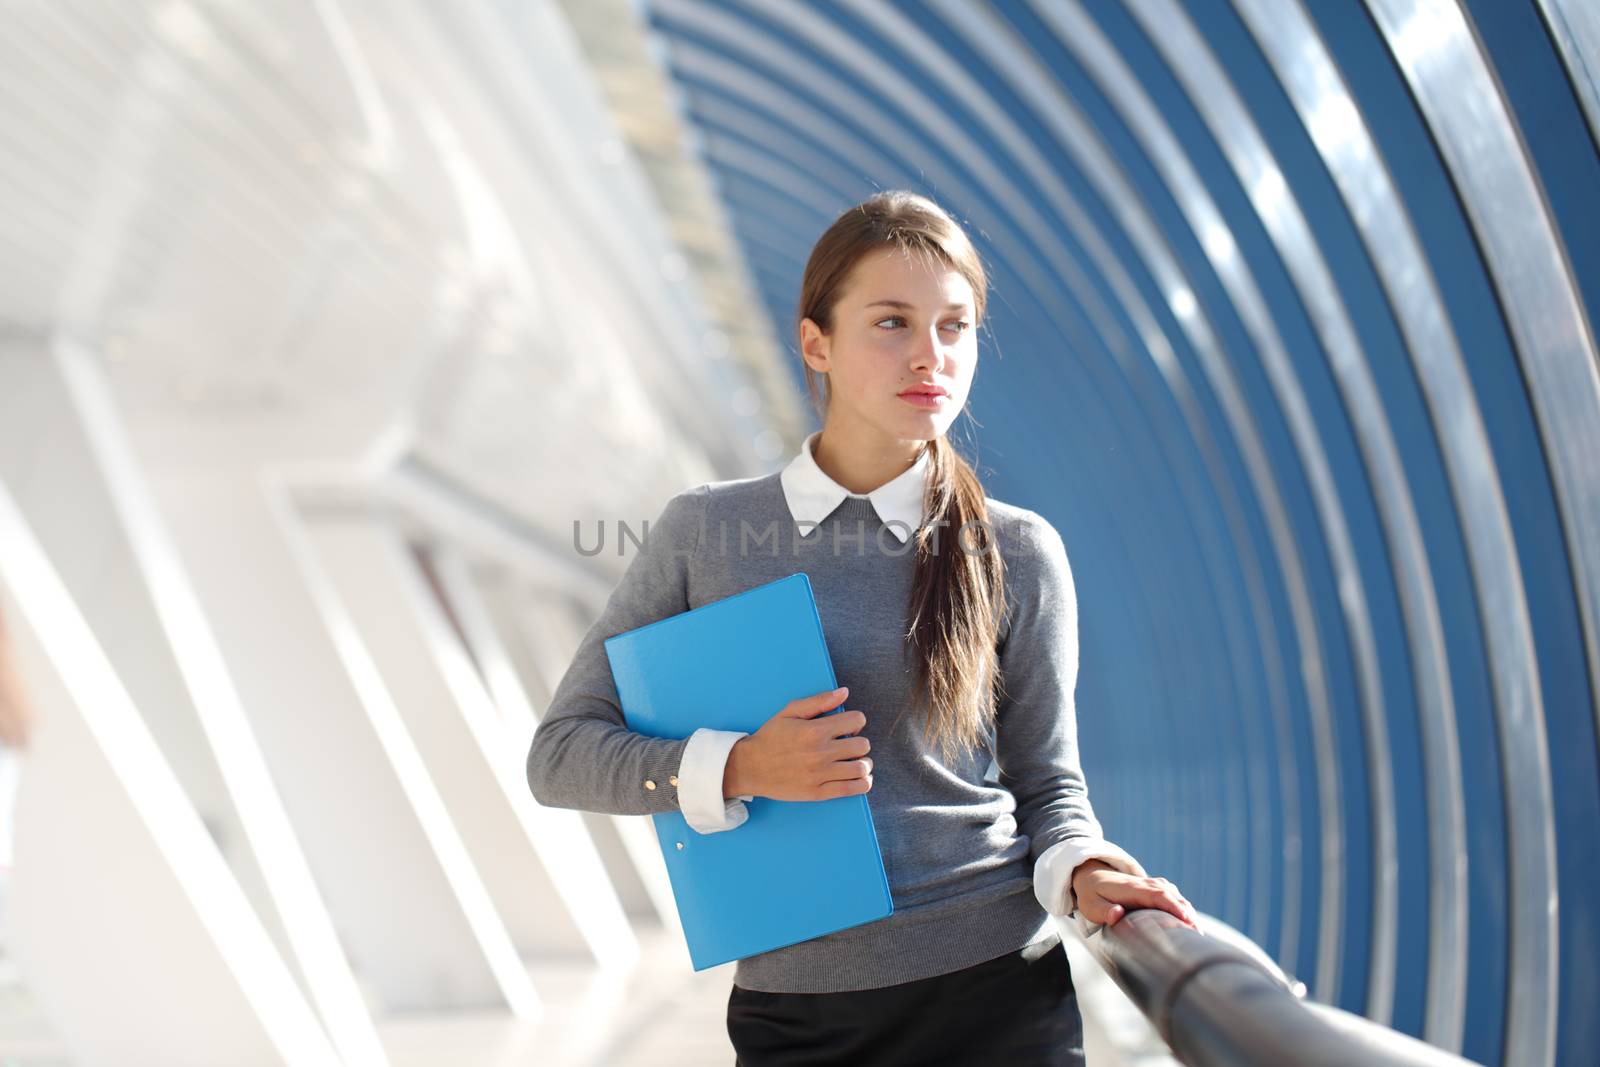 Young Businesswoman with folder standing in corridor of modern office building